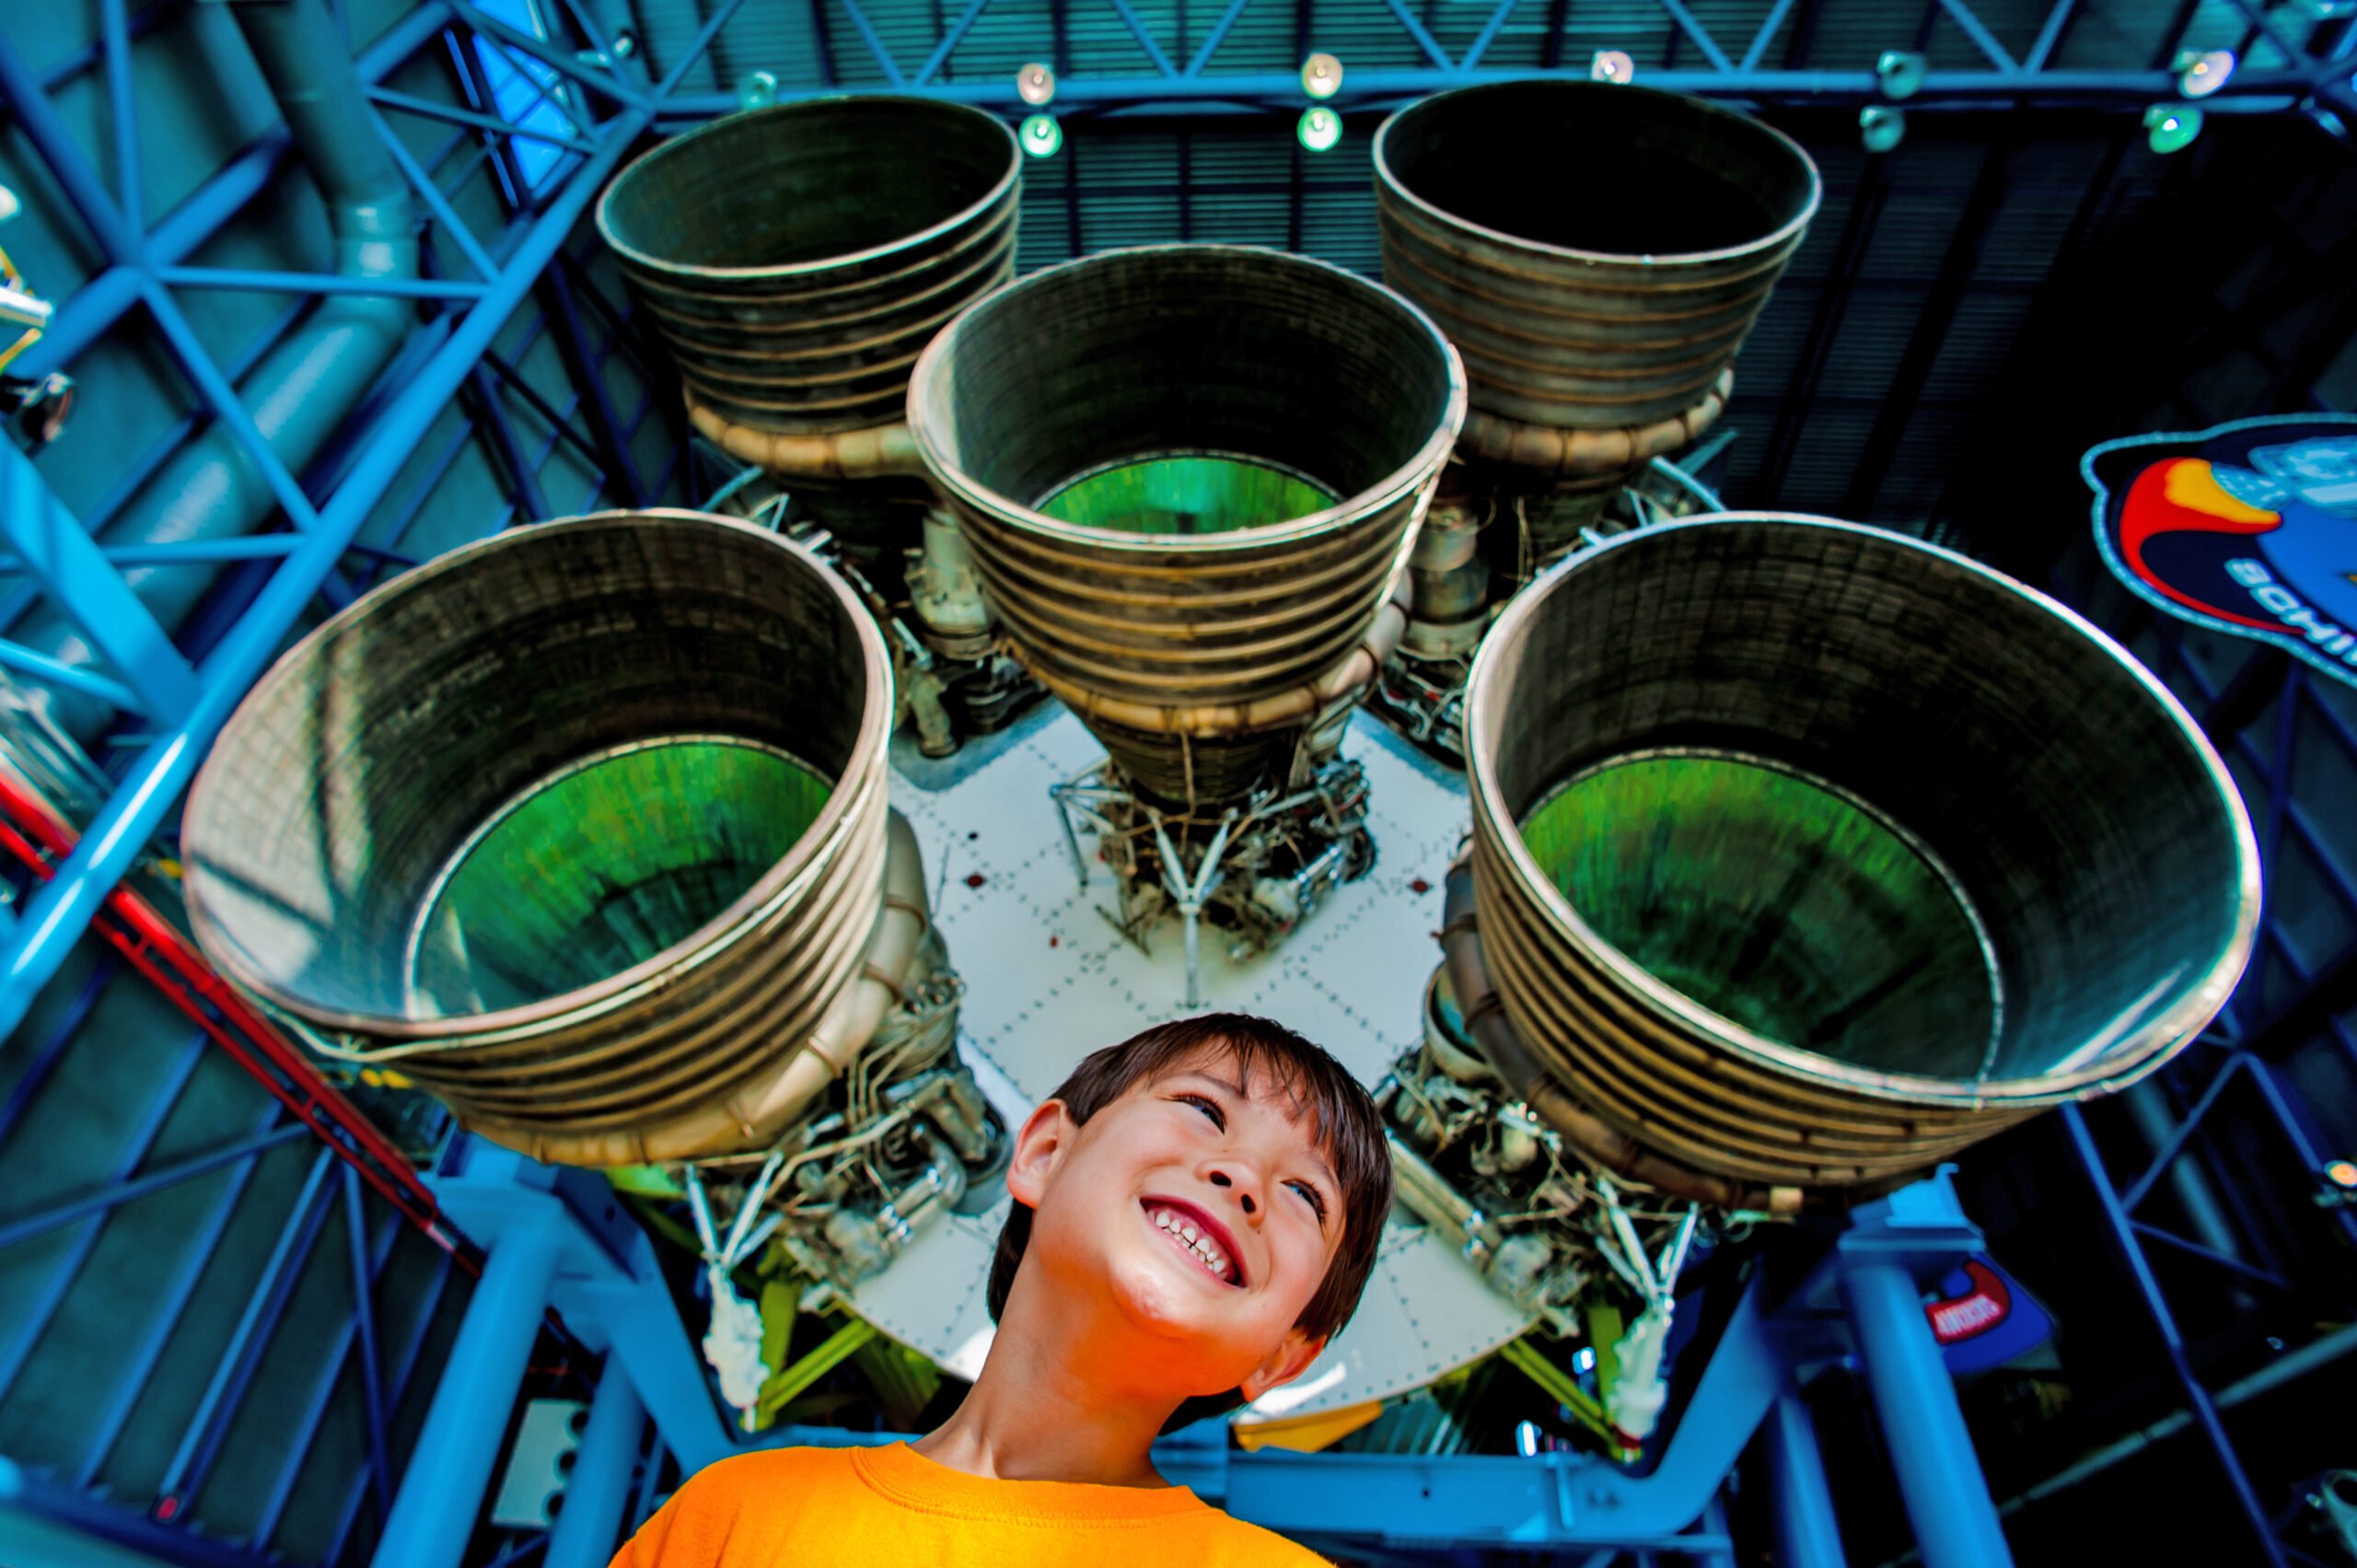 A kid smiling and having fun underneath the engine of a Saturn V rocket at Kennedy Space Center Visitor Complex in Titusville, FL